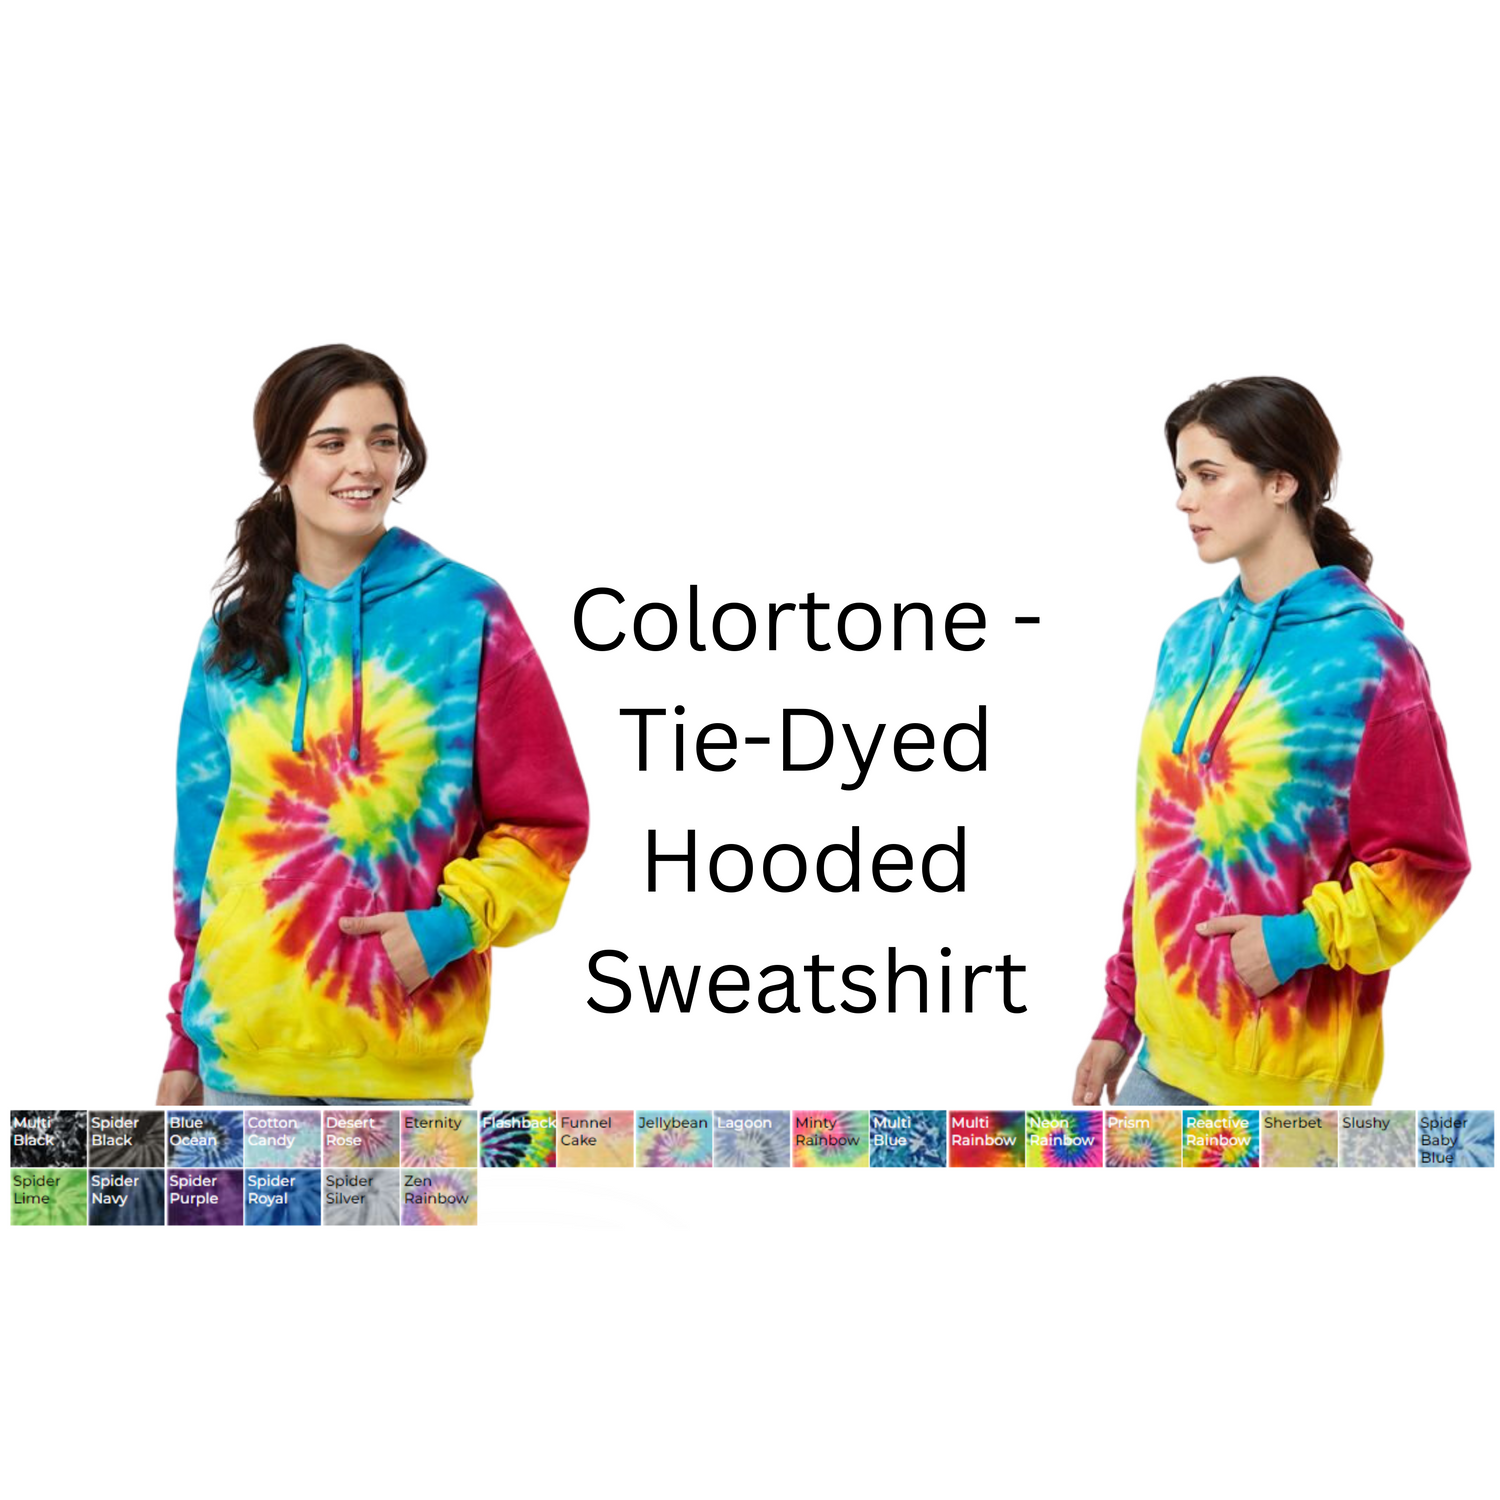 Tie-Dyed Hooded Sweatshirt (Many color options!)